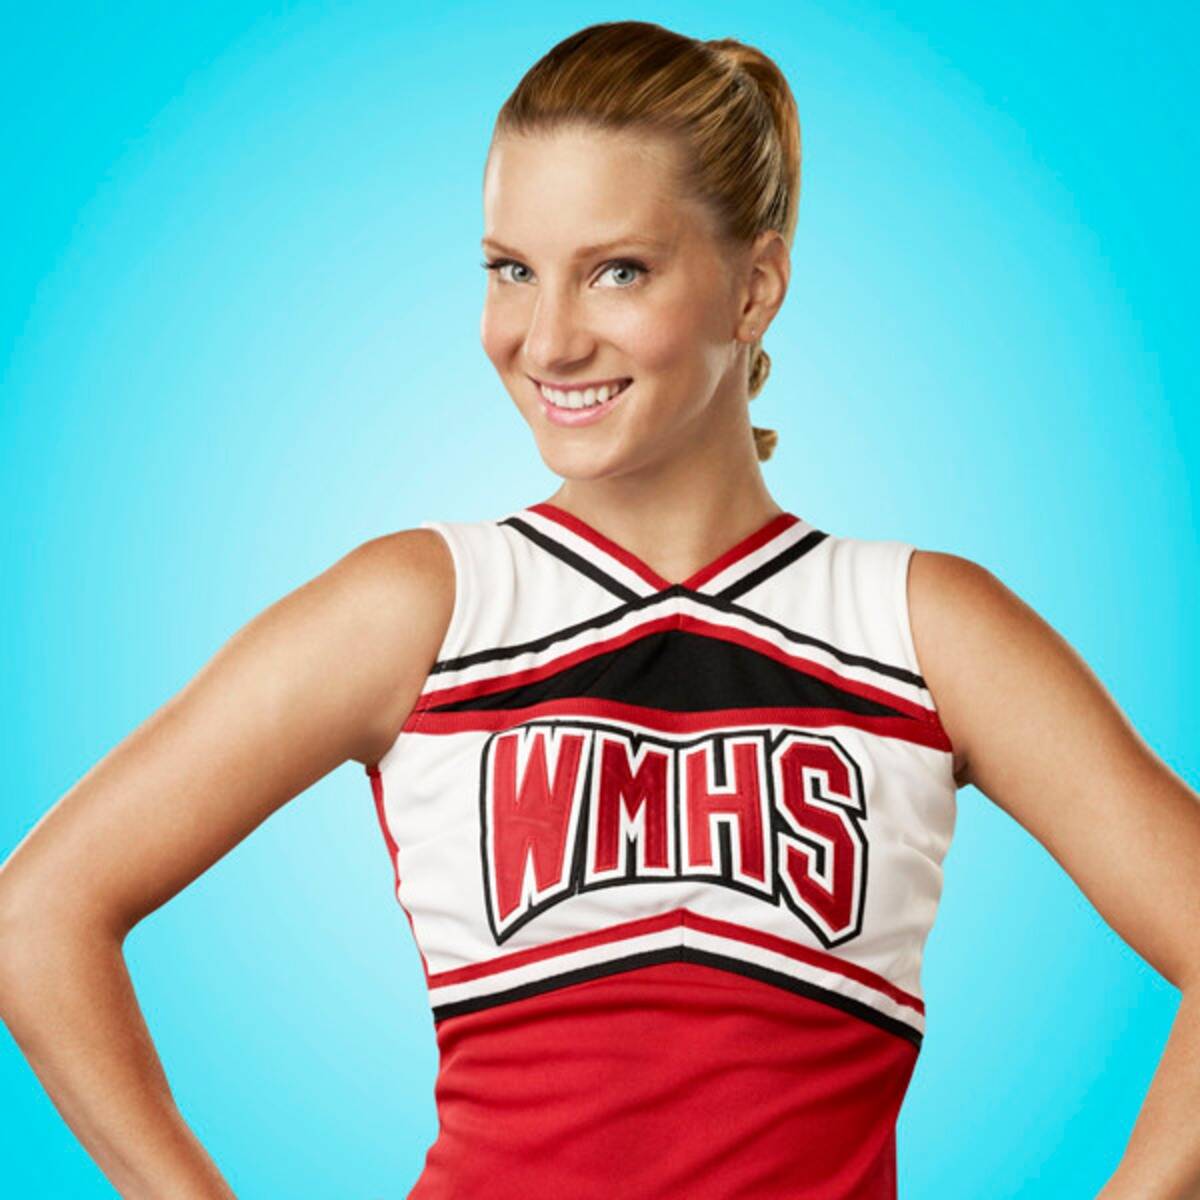 Heather Morris as Brittany S. Pierce on Glee.